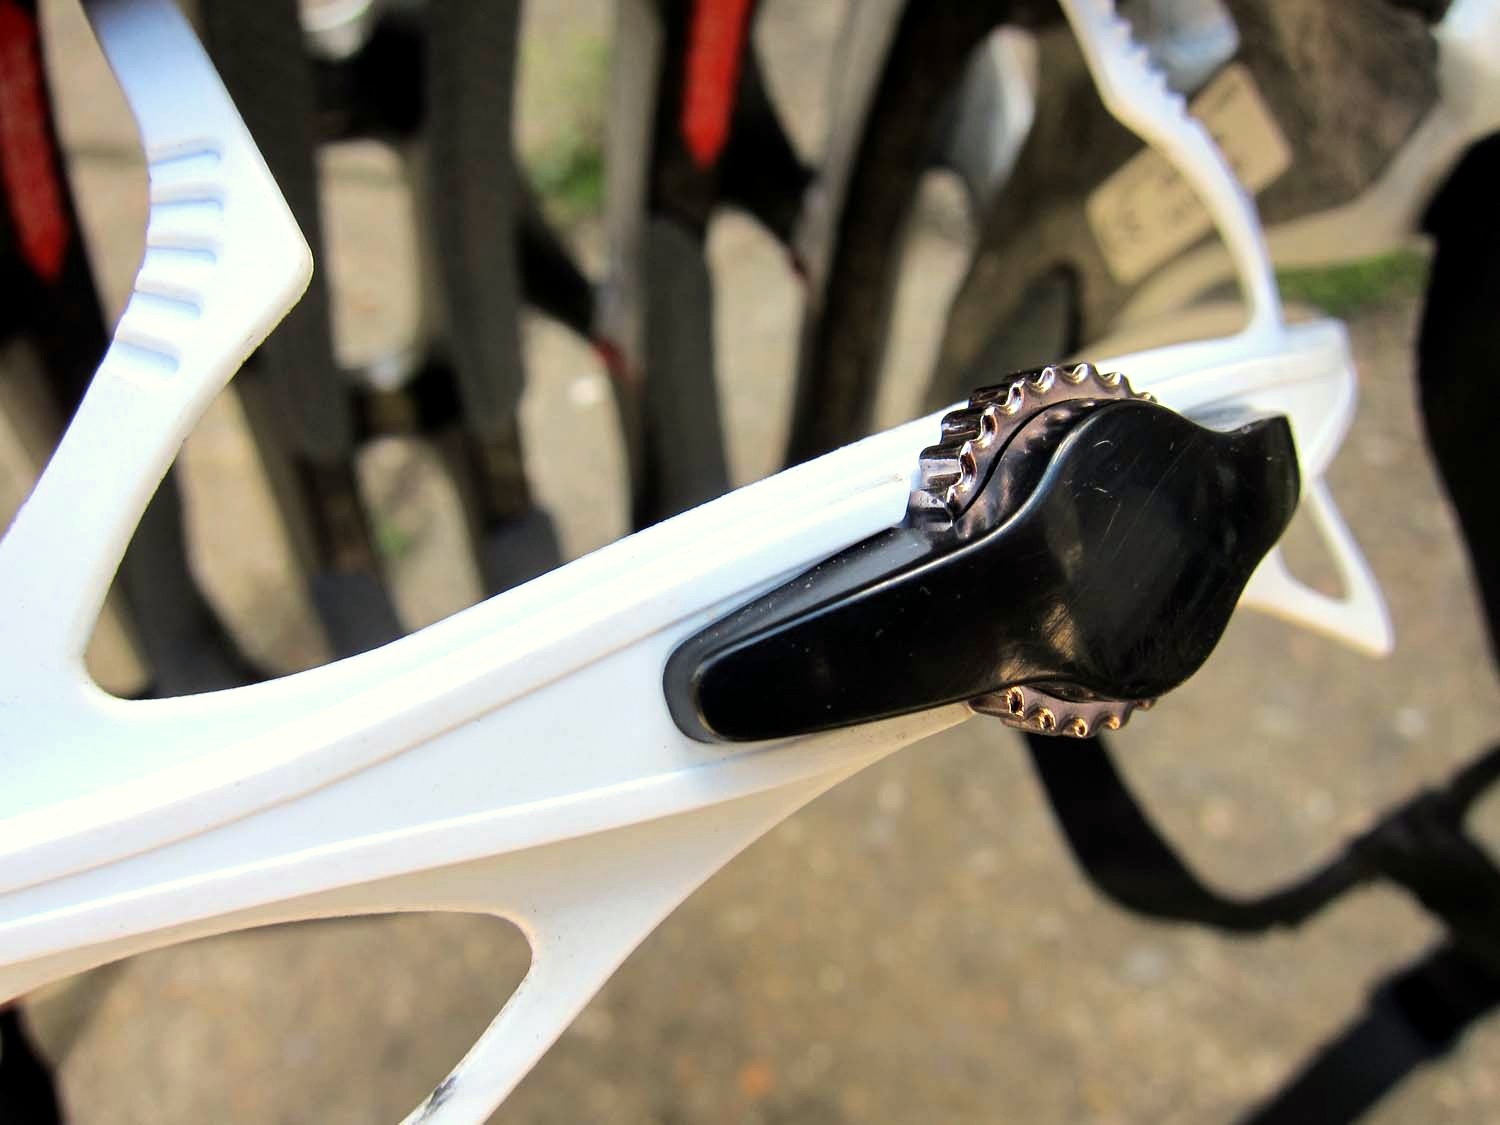 Dial adjuster on cycling helmet